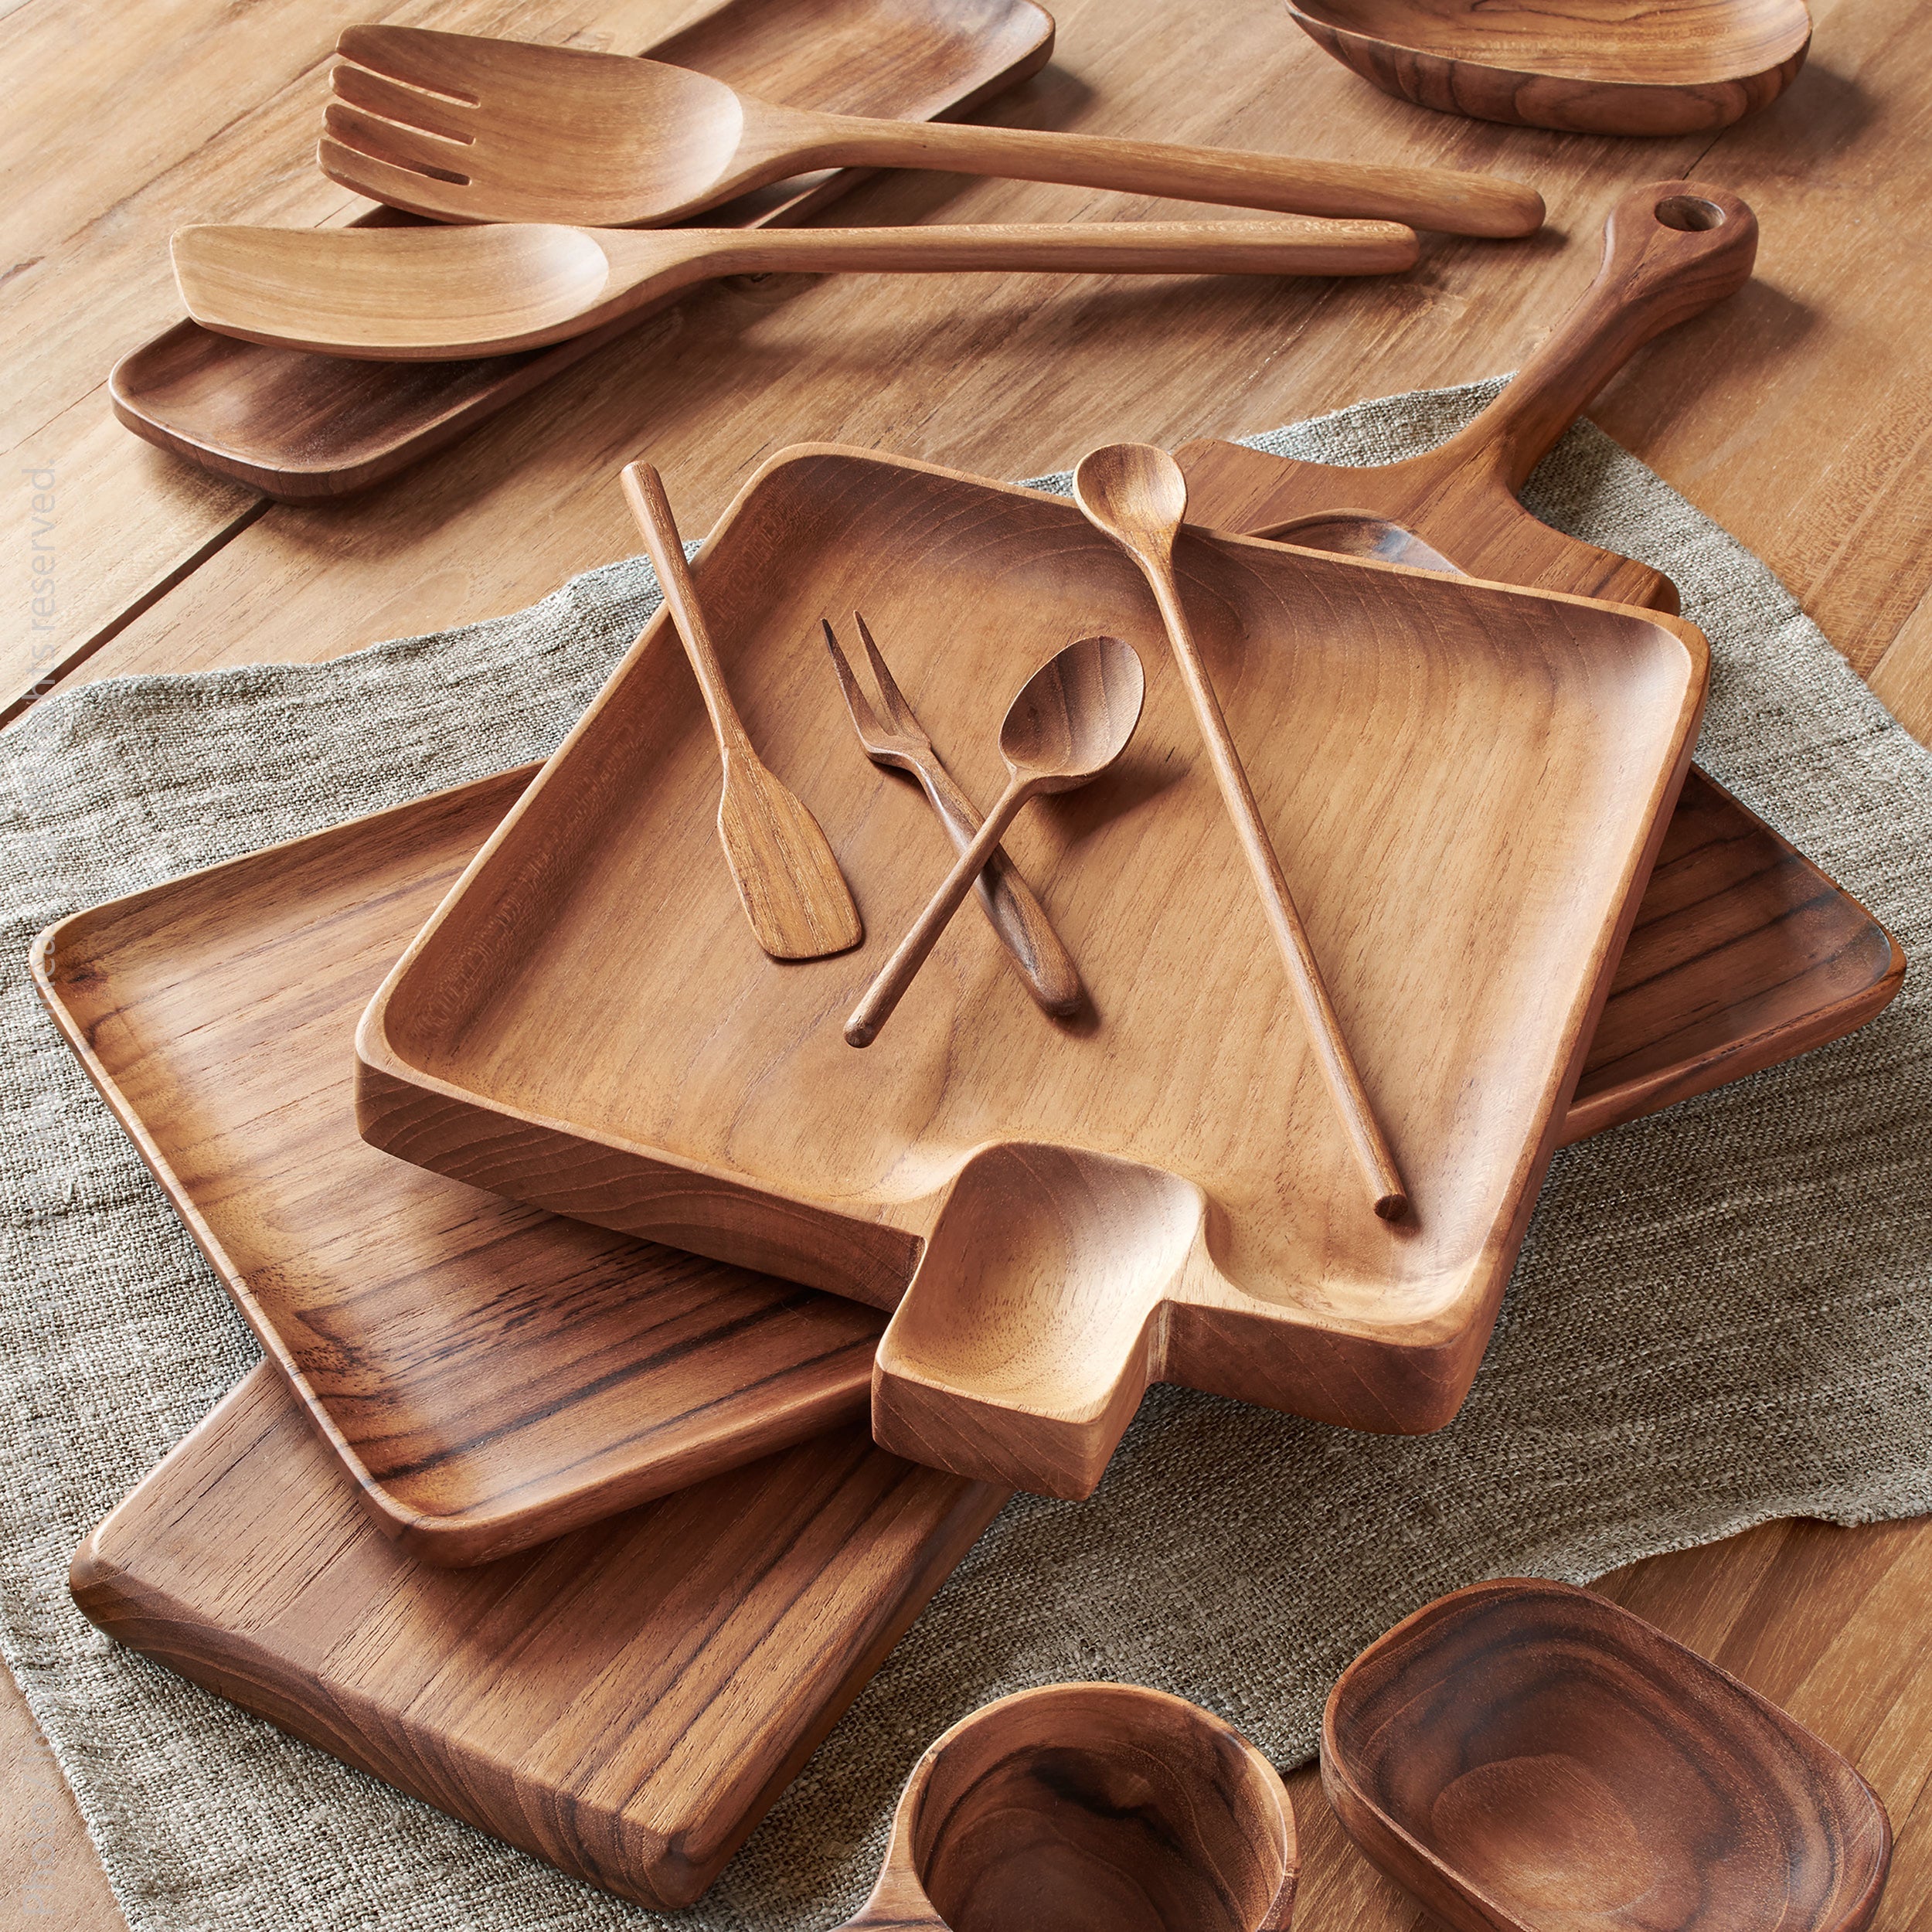 Chiku Teak Spreader Black Color | Image 3 | From the Chiku Collection | Expertly handmade with natural teak for long lasting use | These utensils are sustainably sourced | Available in natural color | texxture home